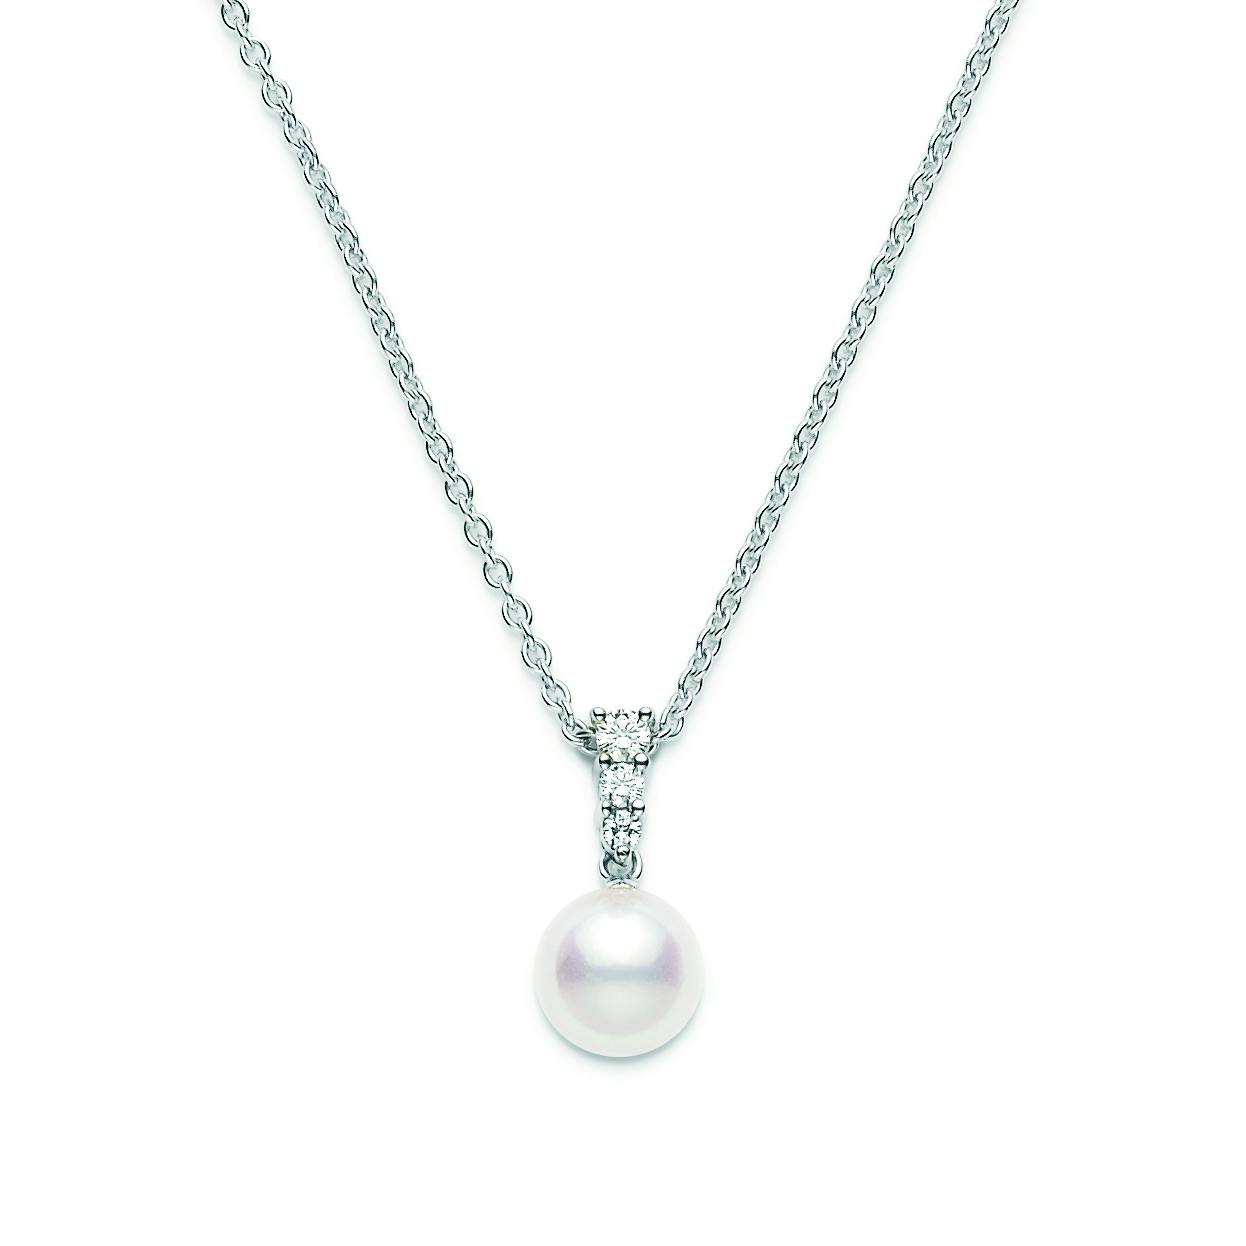 Mikimoto Morning Dew 8mm Akoya Cultured Pearl Necklace with Diamonds